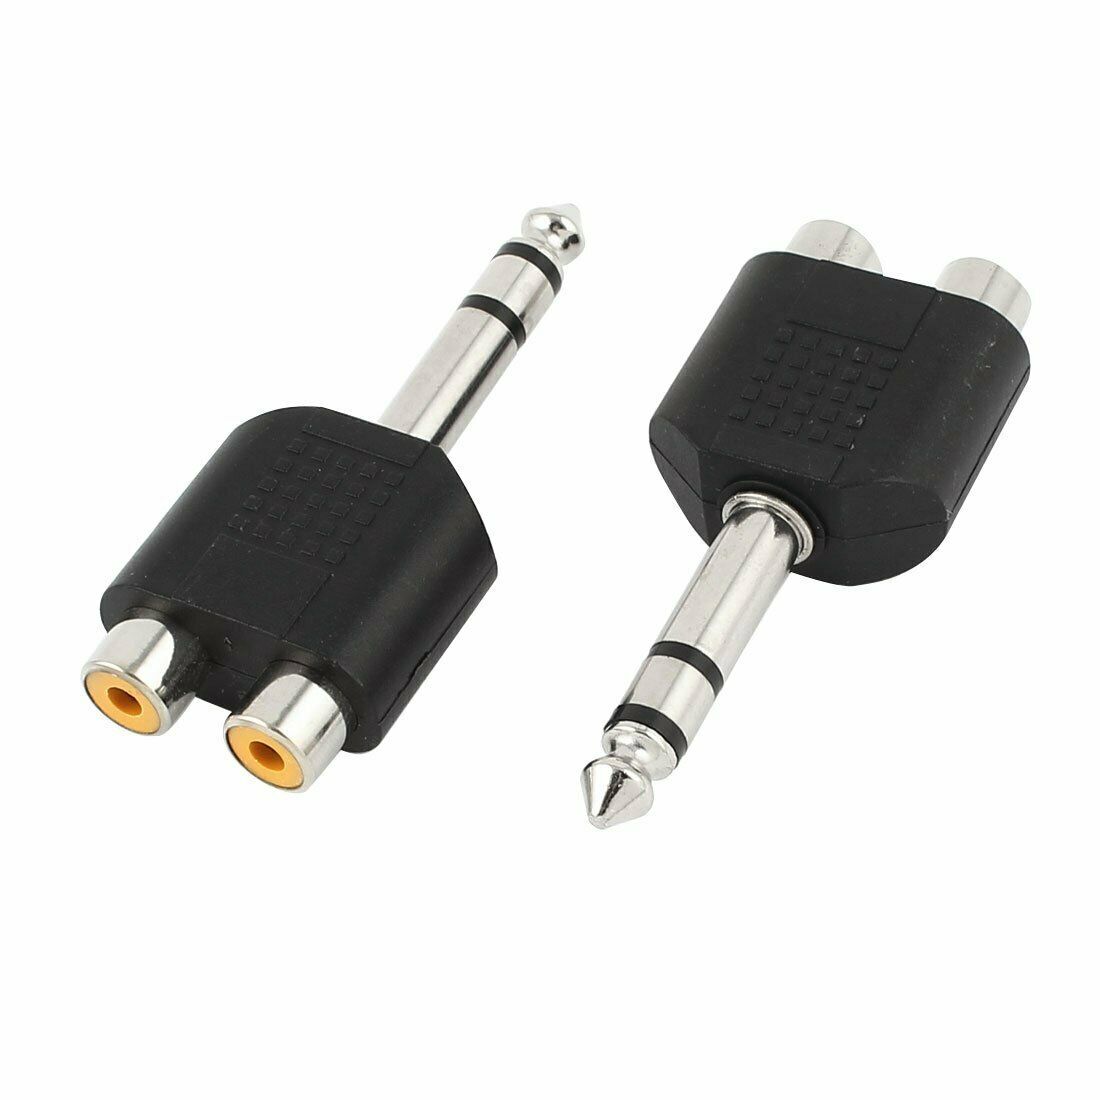 6.5mm Aux Male to 2 RCA Female Adapter